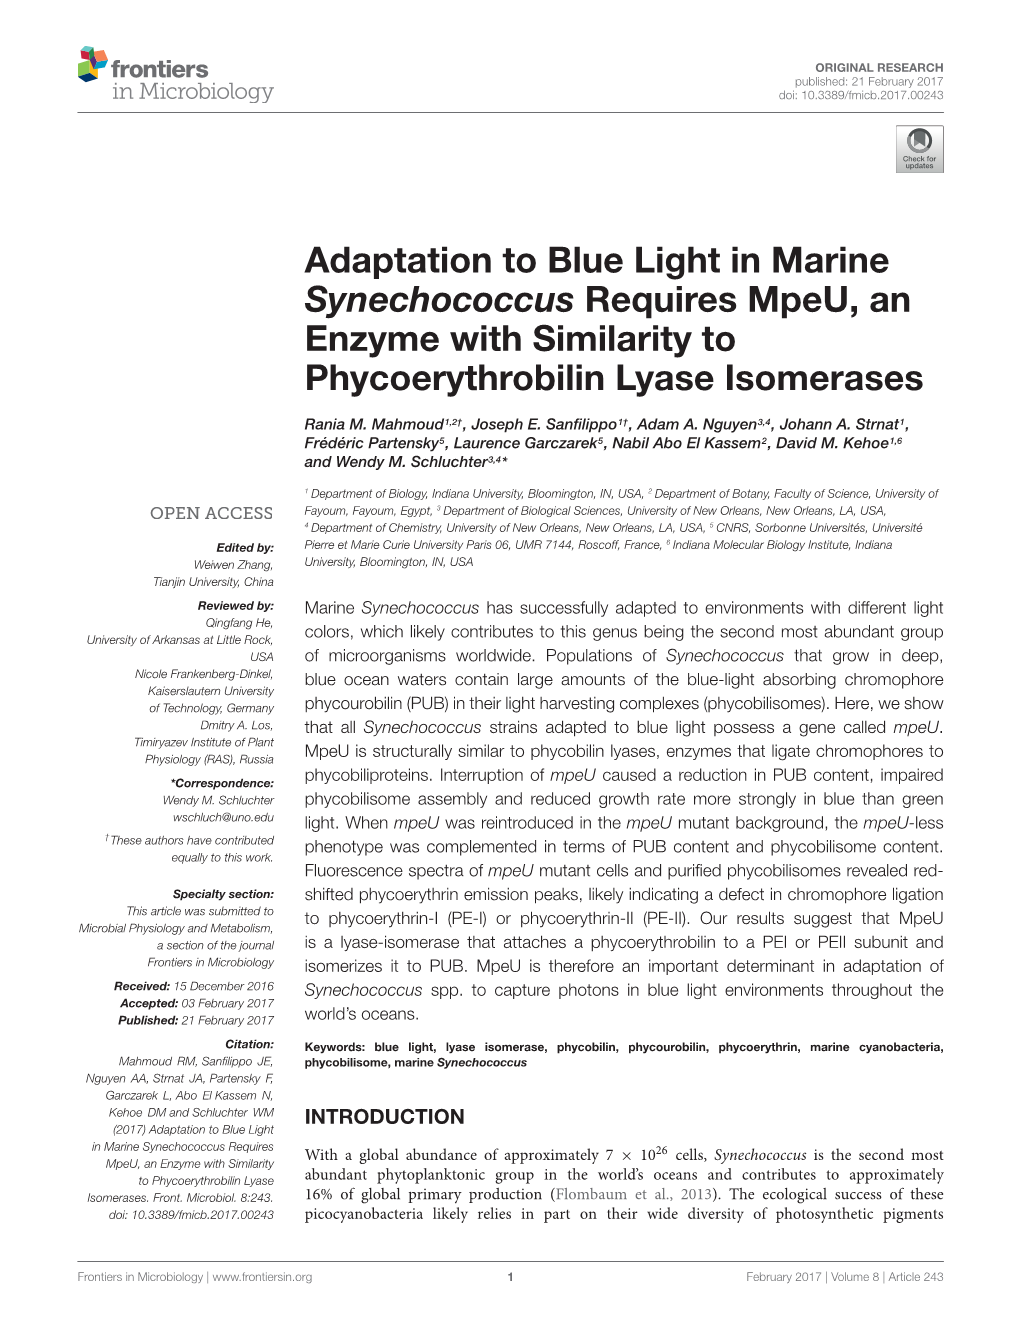 Adaptation to Blue Light in Marine Synechococcus Requires Mpeu, an Enzyme with Similarity to Phycoerythrobilin Lyase Isomerases